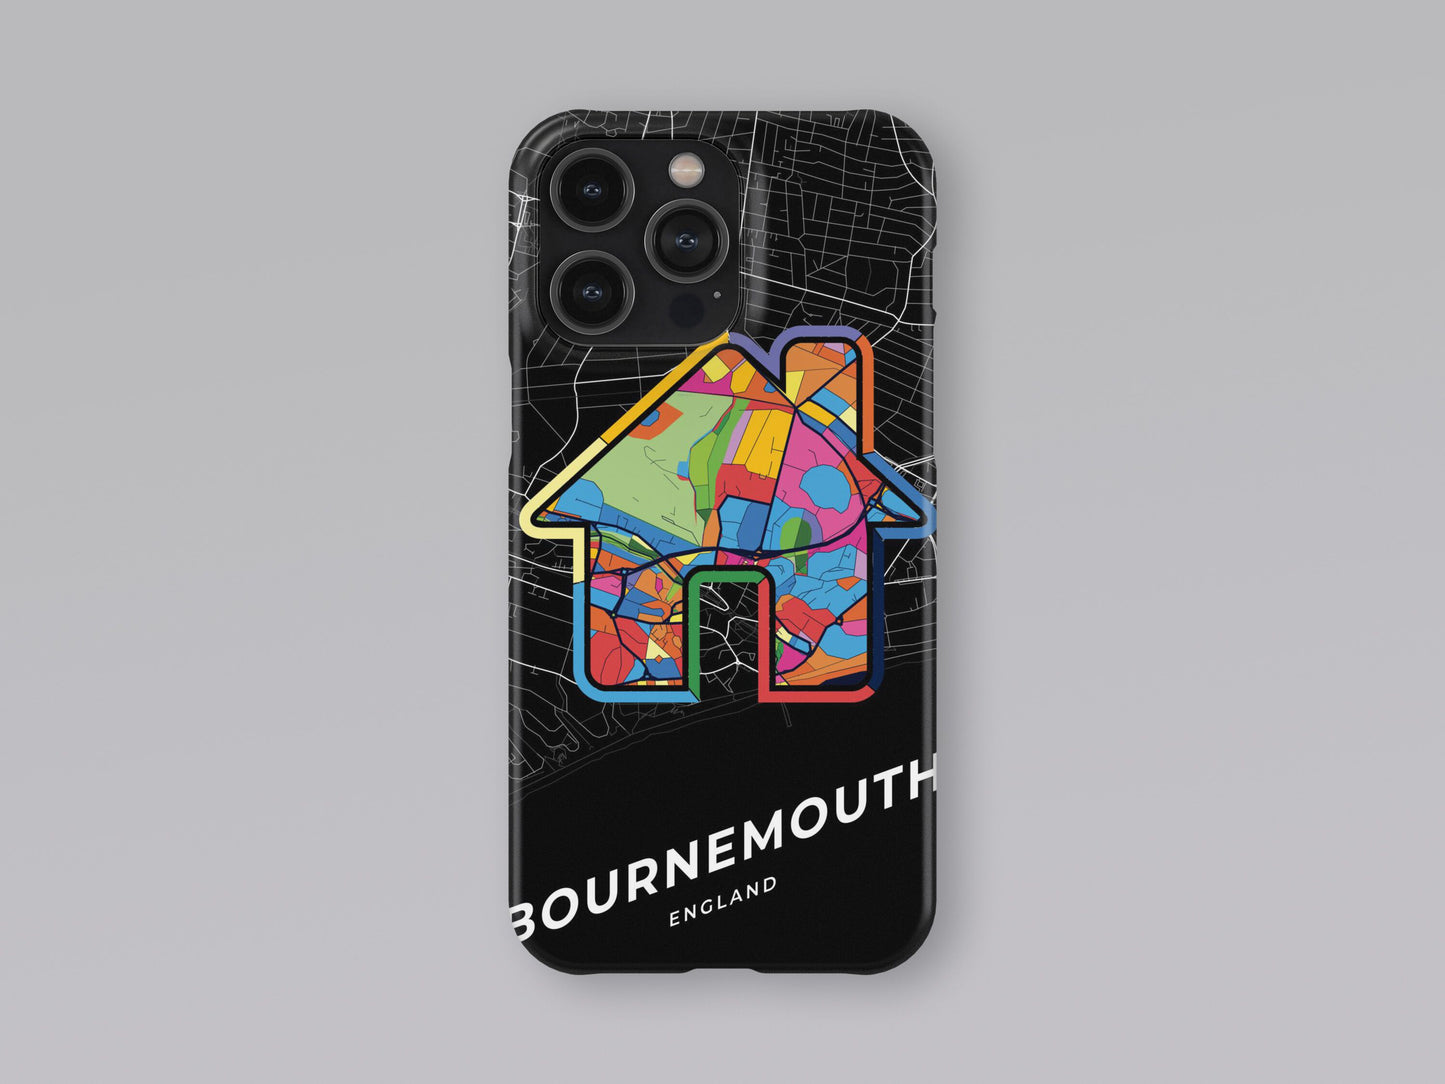 Bournemouth England slim phone case with colorful icon. Birthday, wedding or housewarming gift. Couple match cases. 3